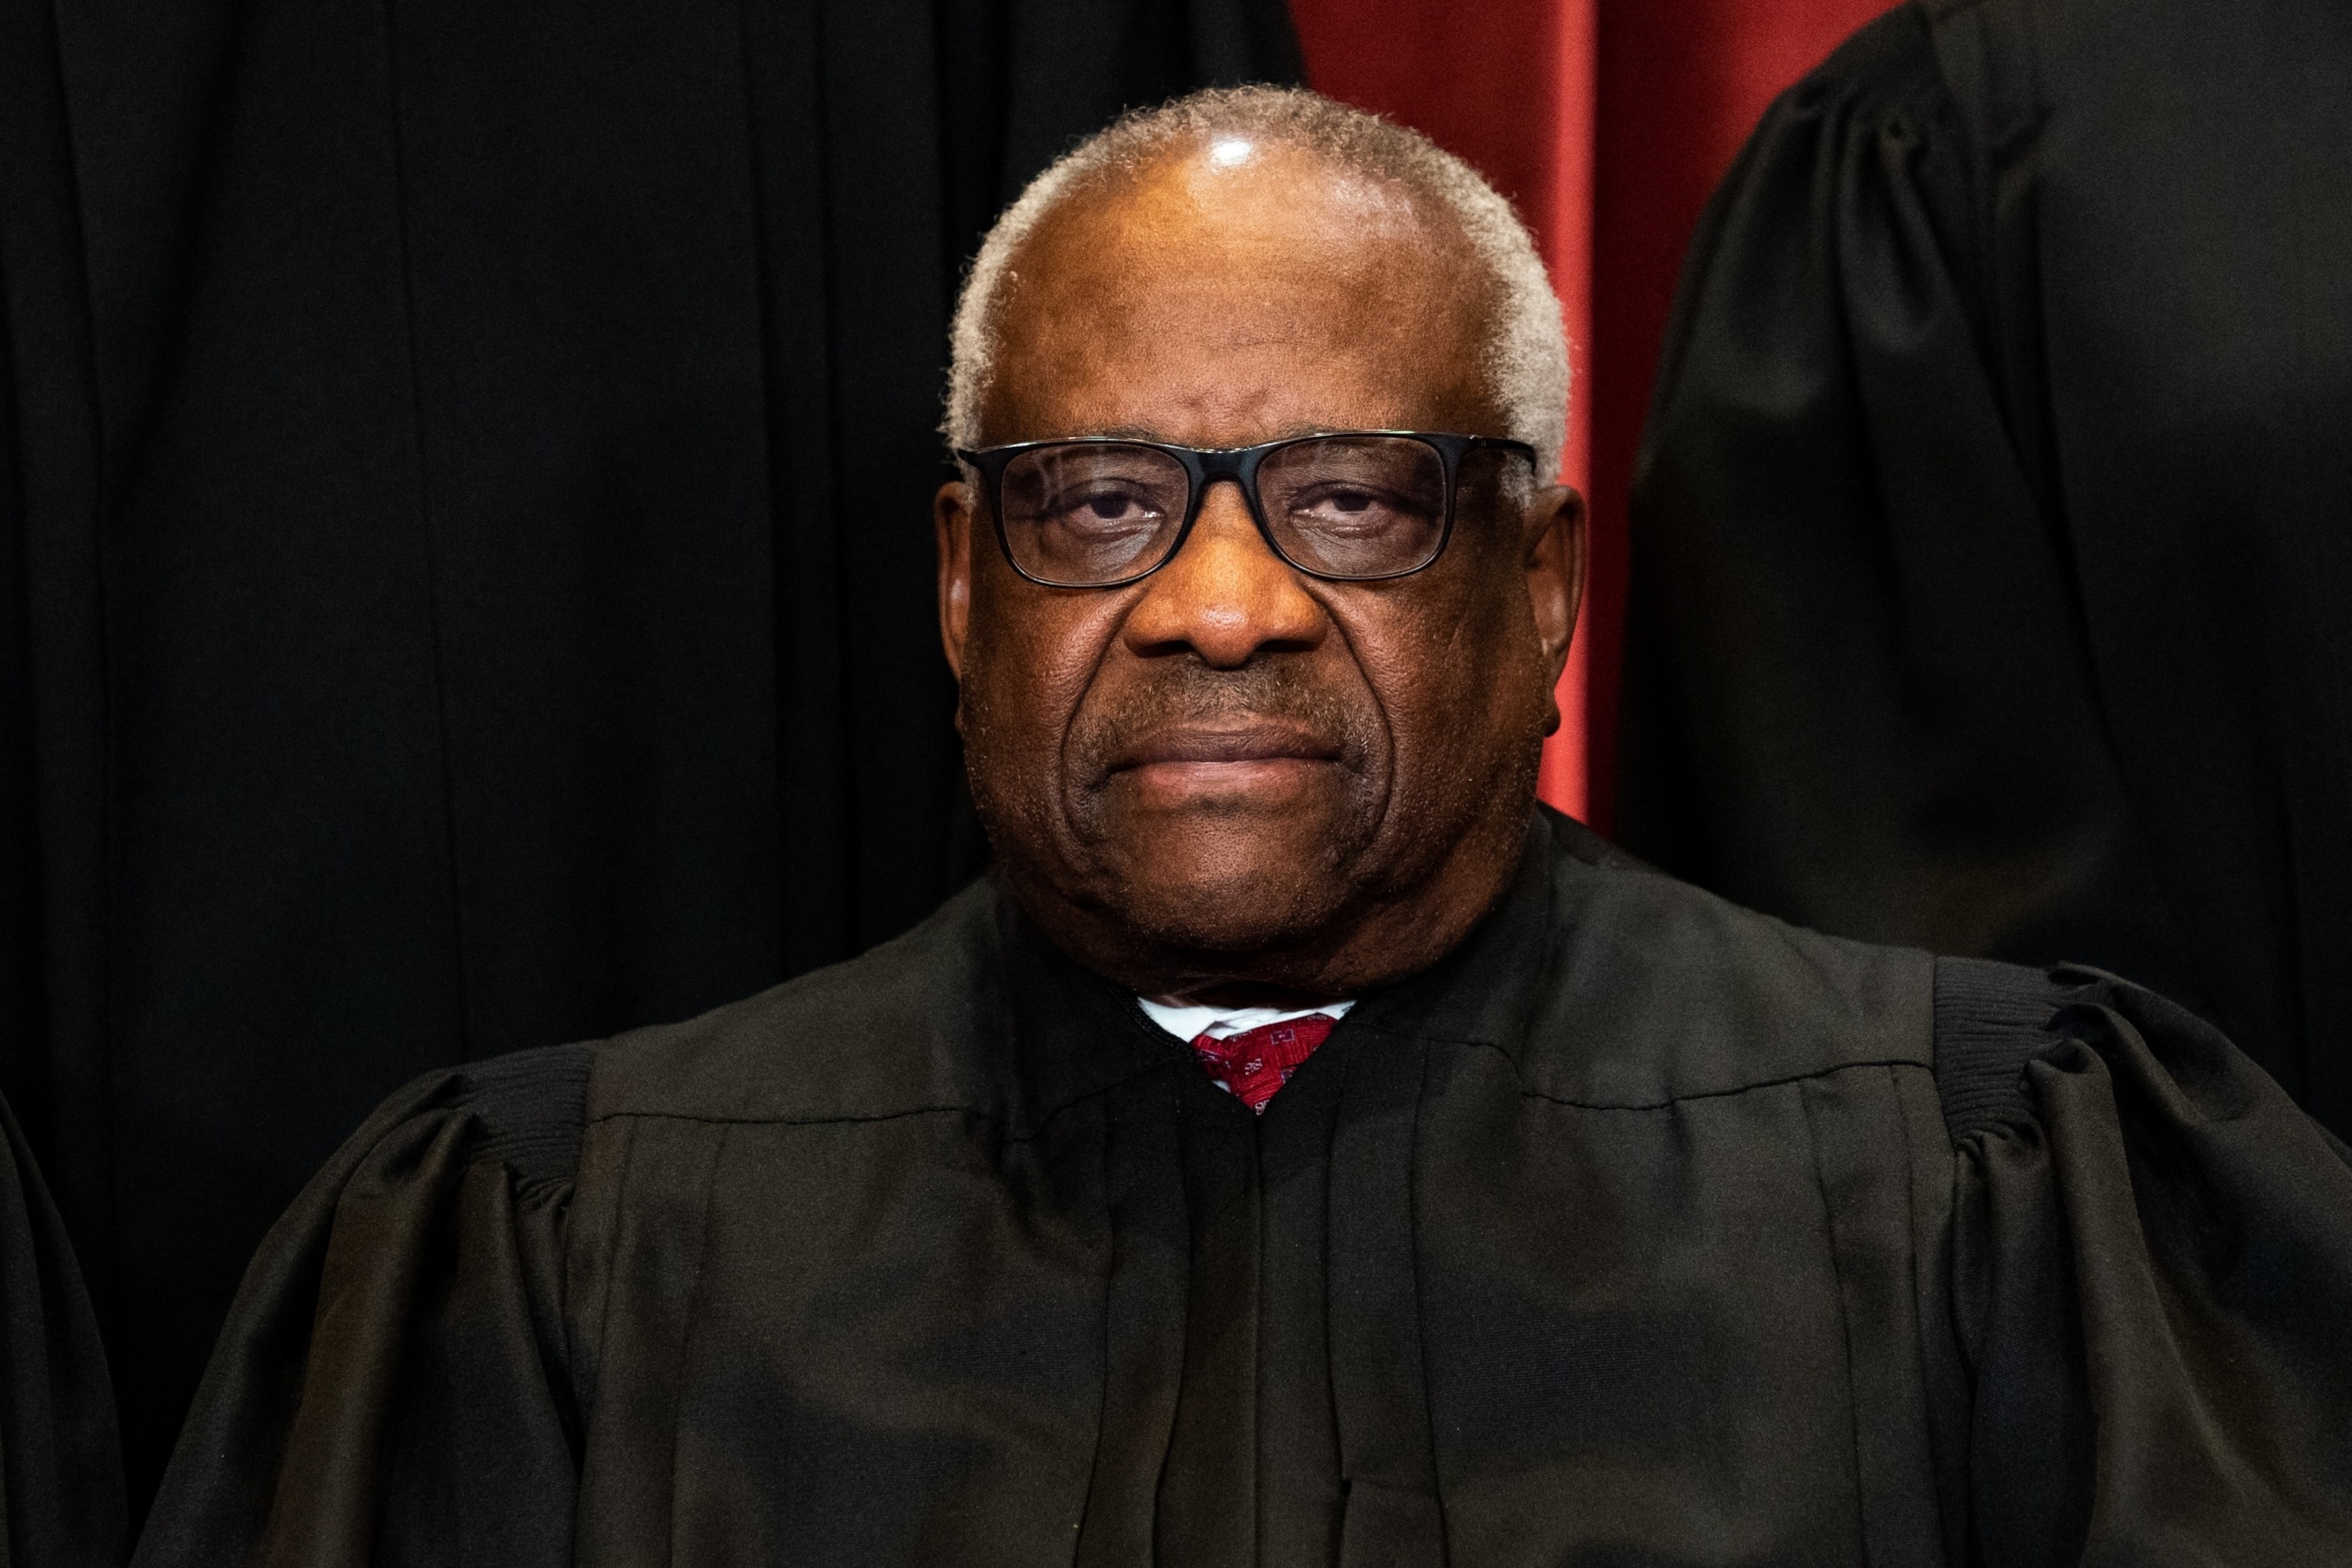 PHOTO: In this April 23, 2021 file photo, Associate Justice Clarence Thomas sits during a group photo of the Justices at the Supreme Court in Washington.